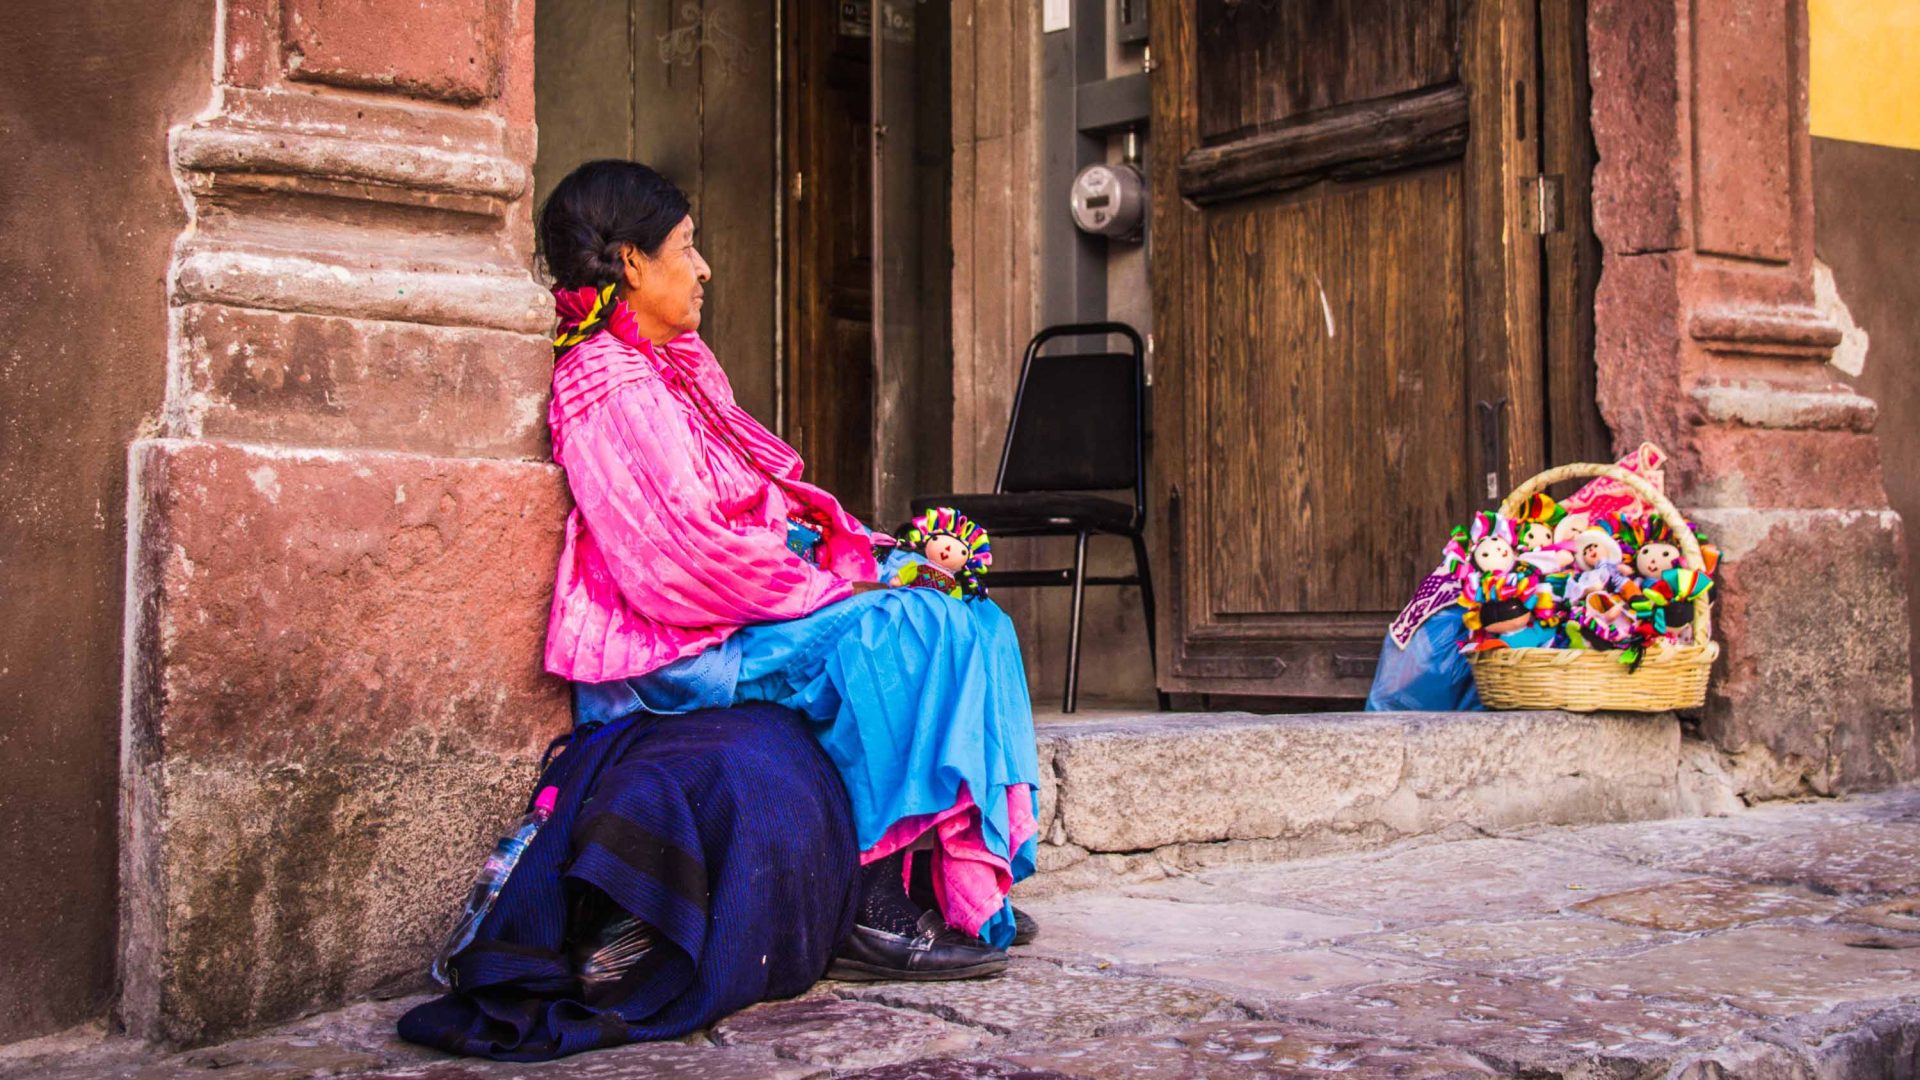 An Indigenous woman in Mexico sells dolls on the street.